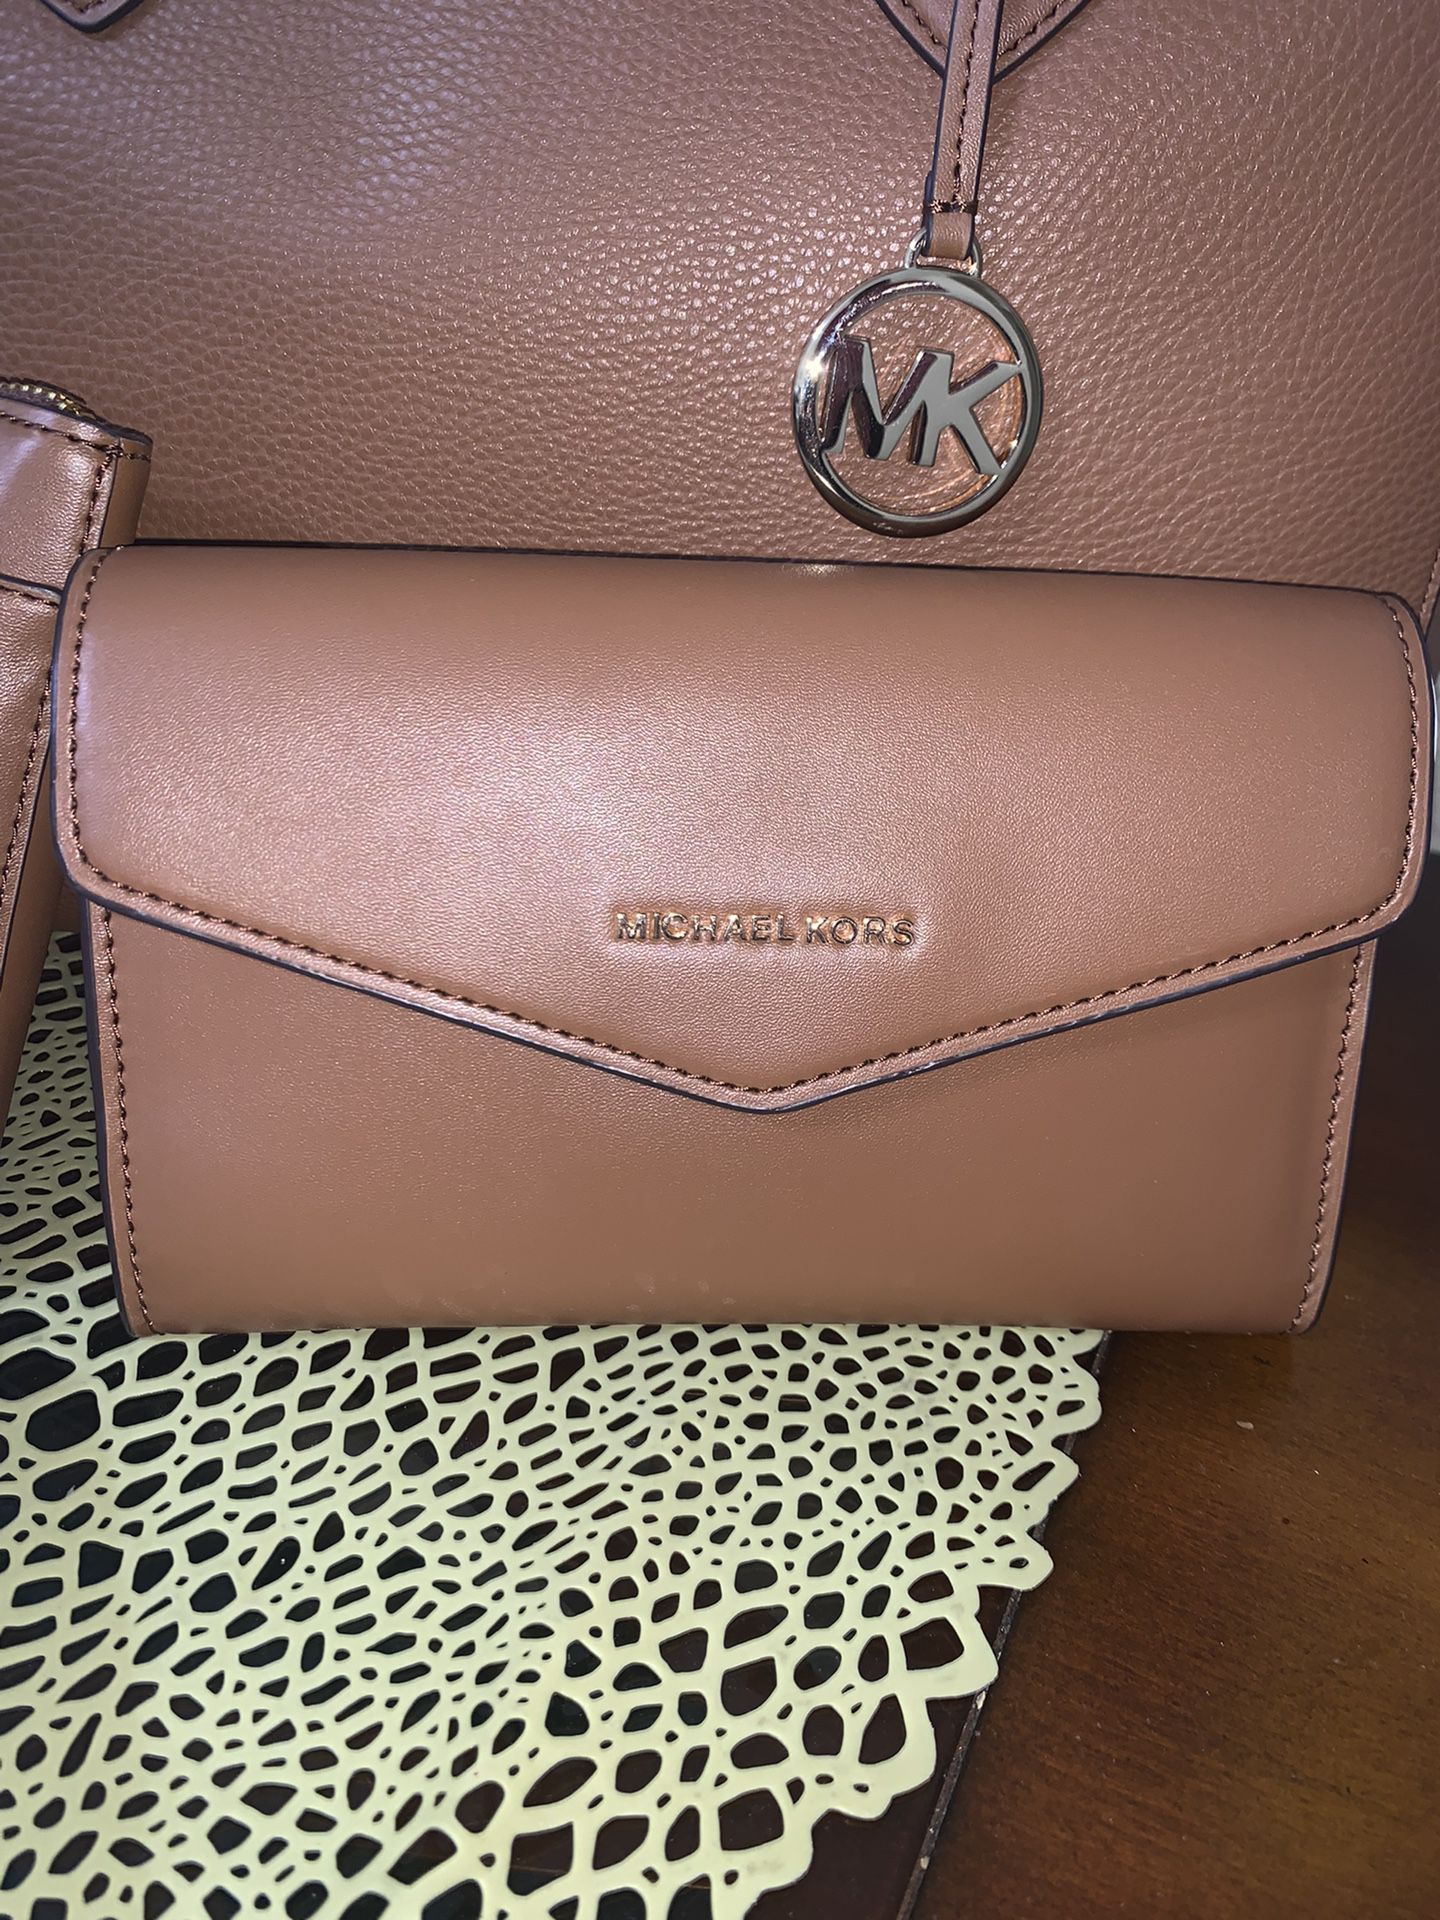 Michael Kors Maisie Large Pebbled Leather 3-in-1 Tote Bag New for Sale in  Florissant, MO - OfferUp